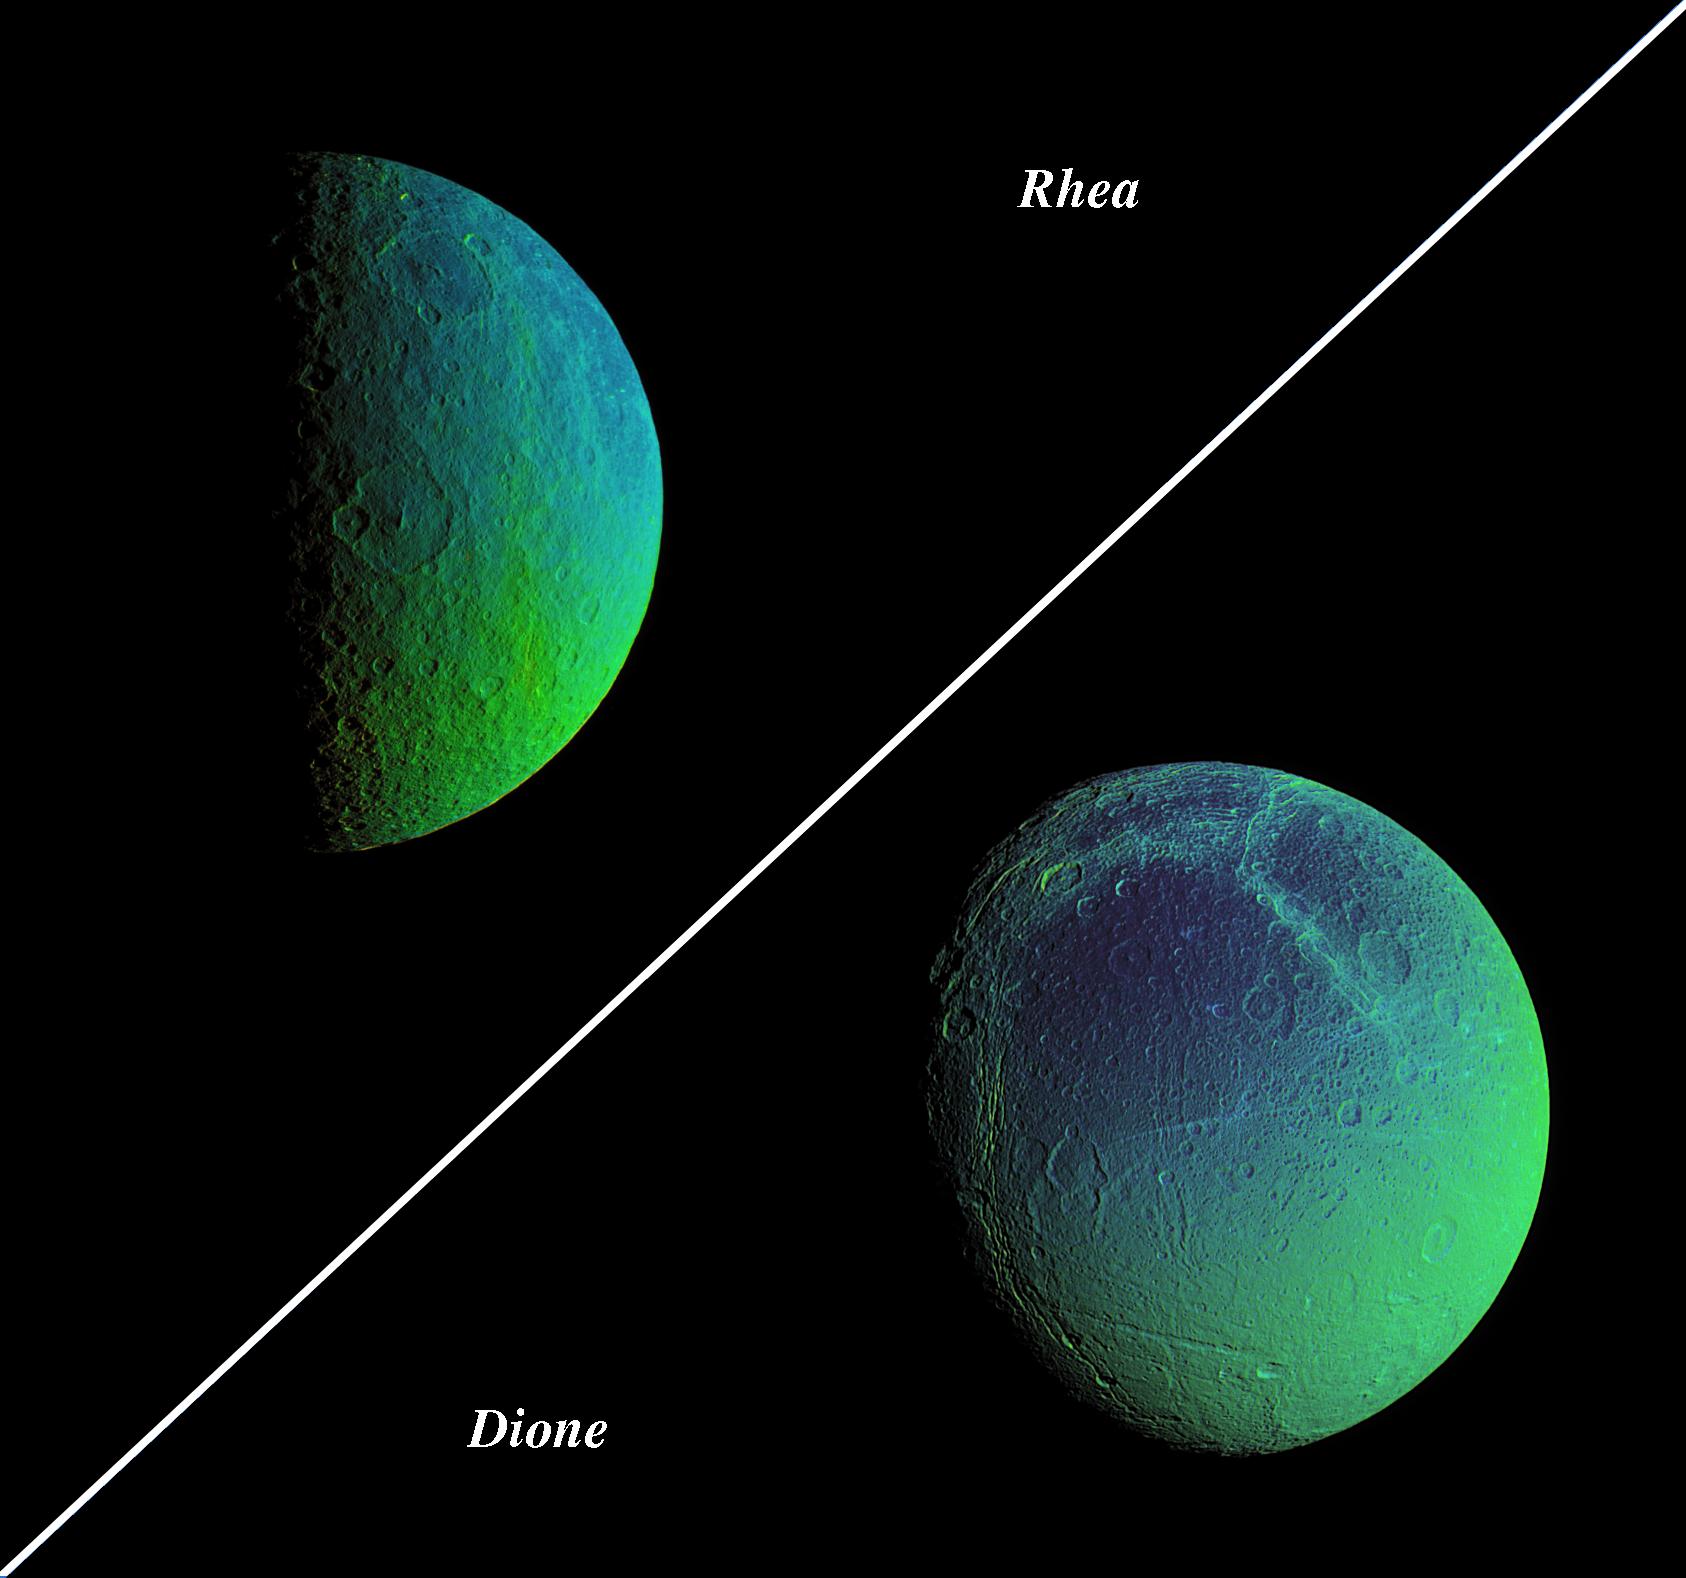 Combination of two views of Saturn's moons Rhea and Dione